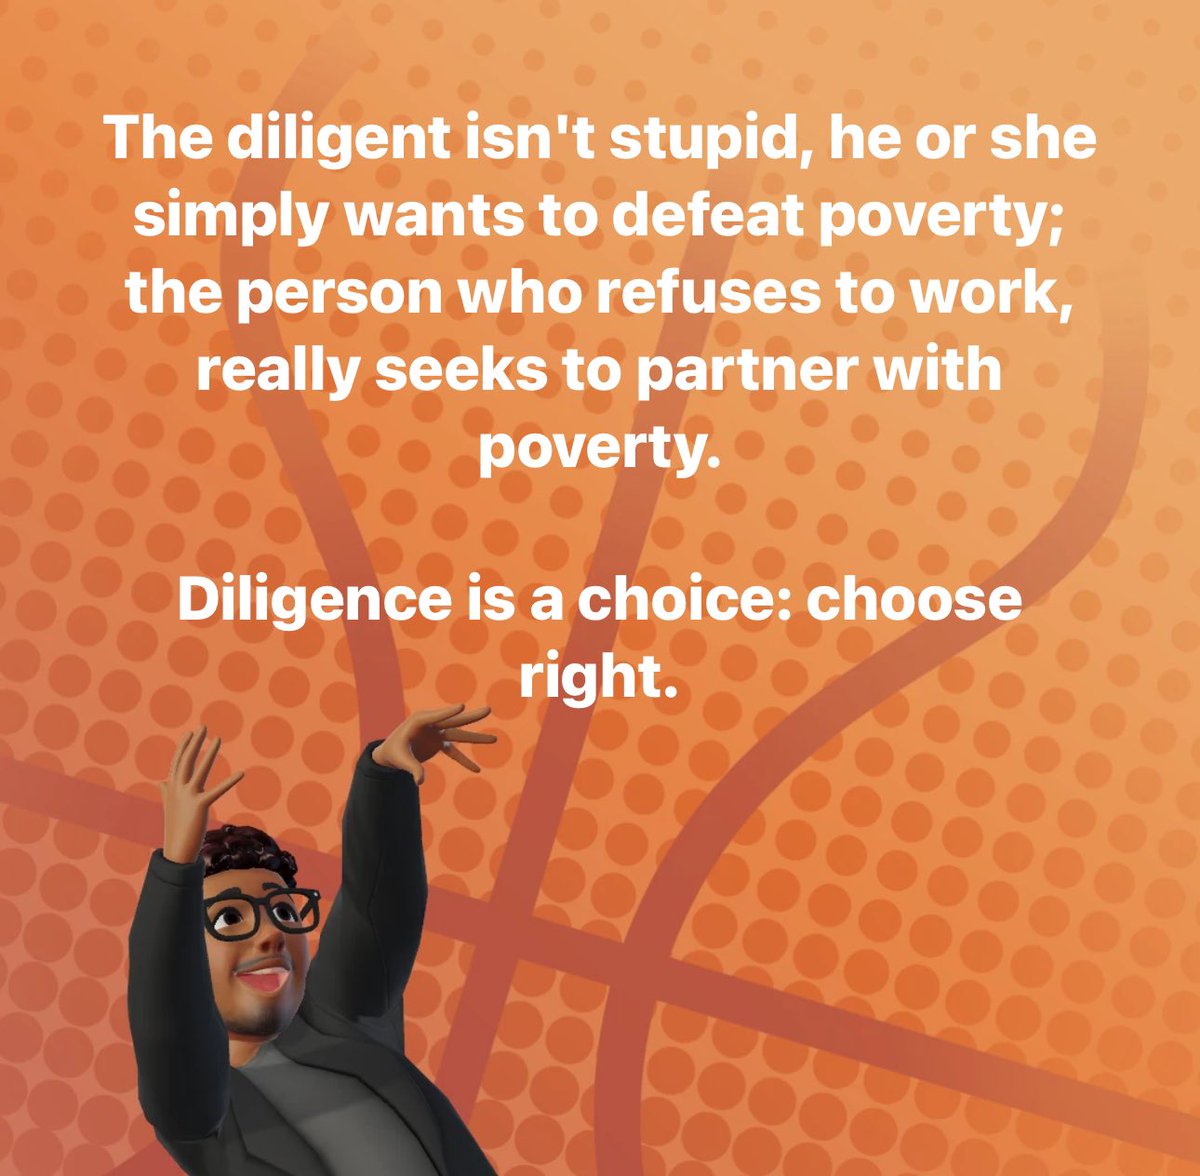 The #diligent isn't #stupid, he or she #simply #wants to #defeat #poverty; the #person who #refuses to #work, really #seeks to #partner with poverty.

#Diligence is a #choice: #choose #right.

#WiseWords #DailyWisdom #PositiveEnergy #Proverb #YorubaProverbs #OldAfricanSayings